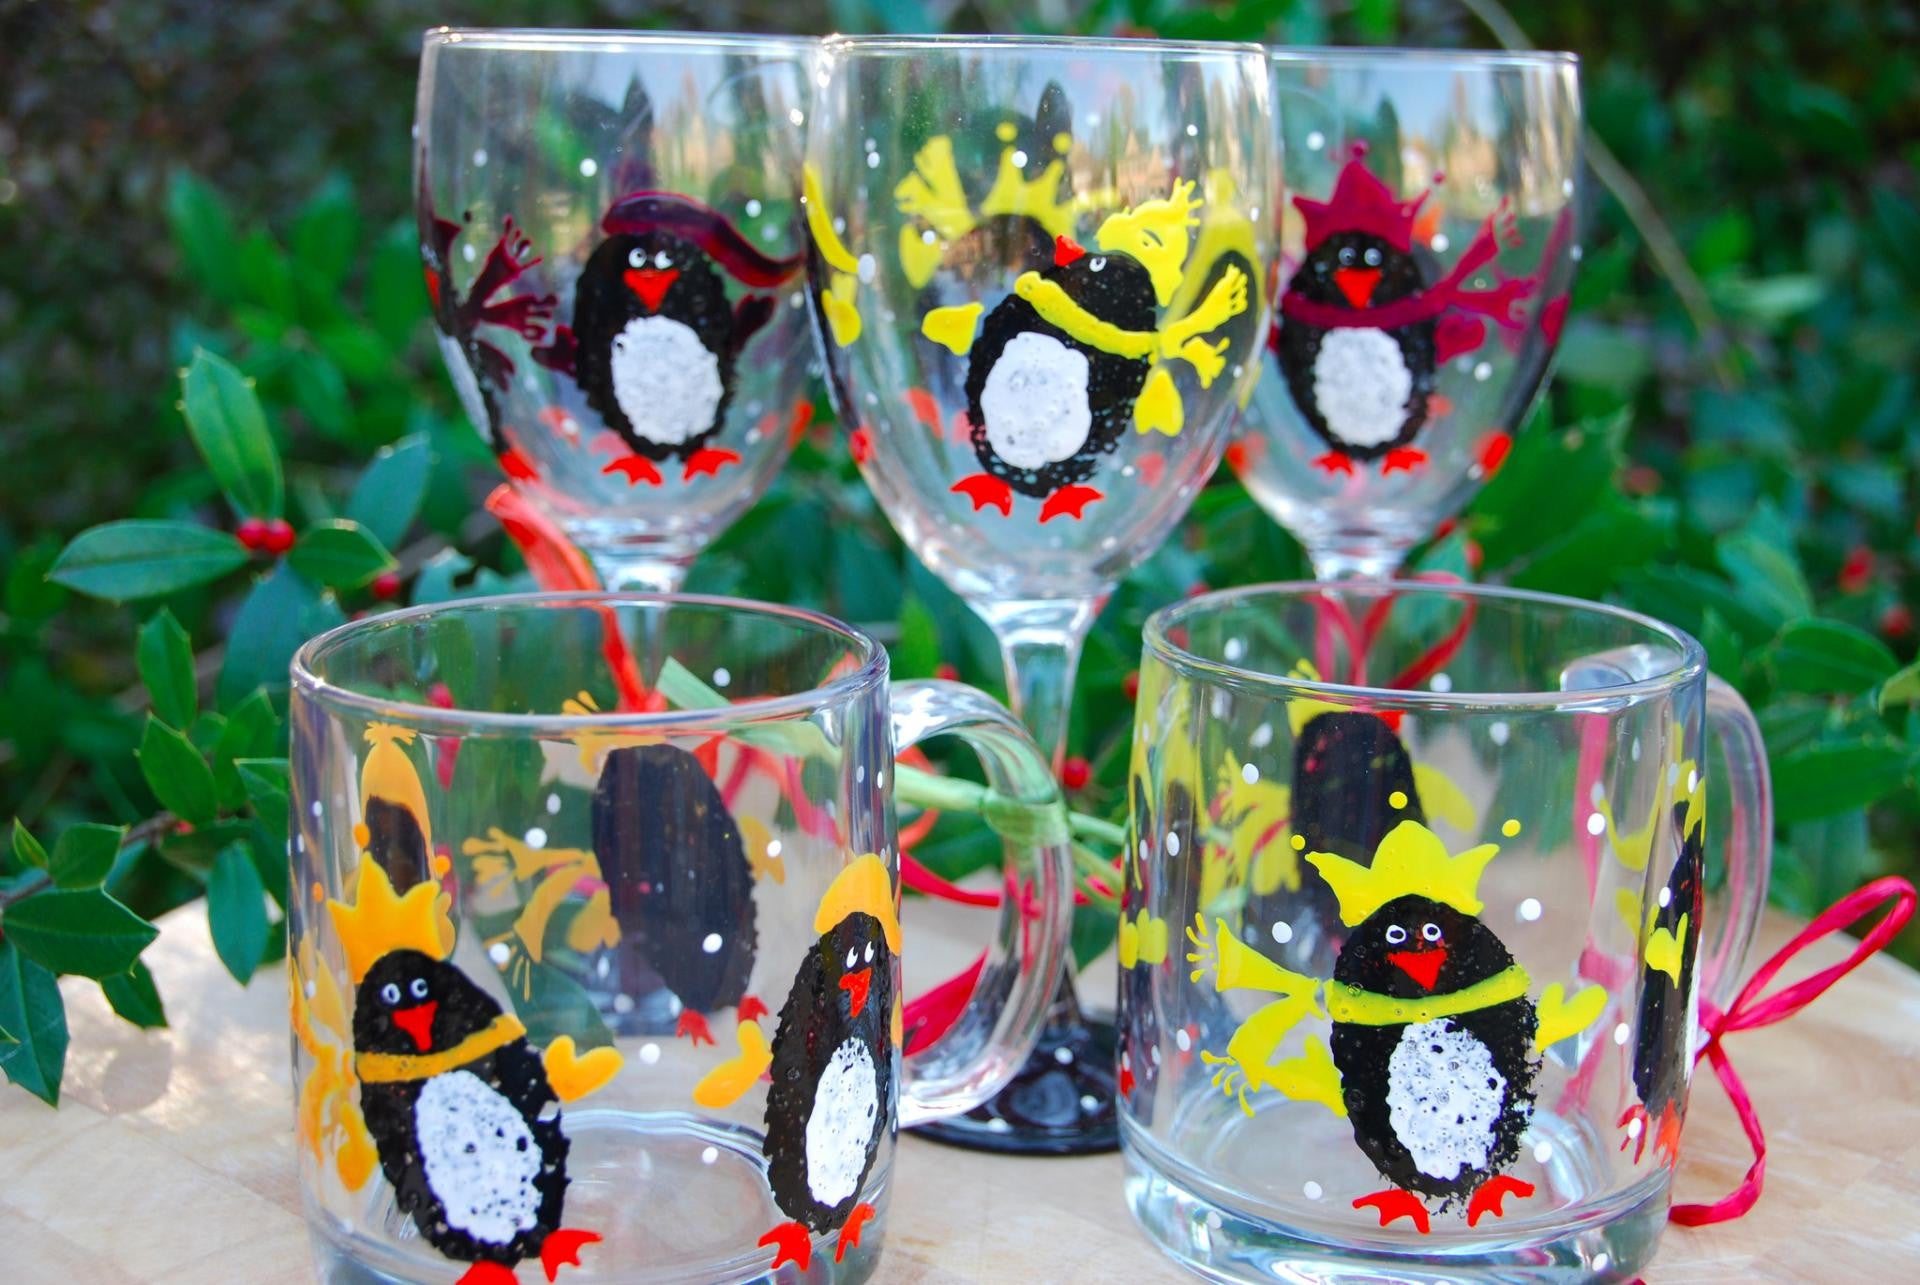 Penguins Hand-painted Glassware